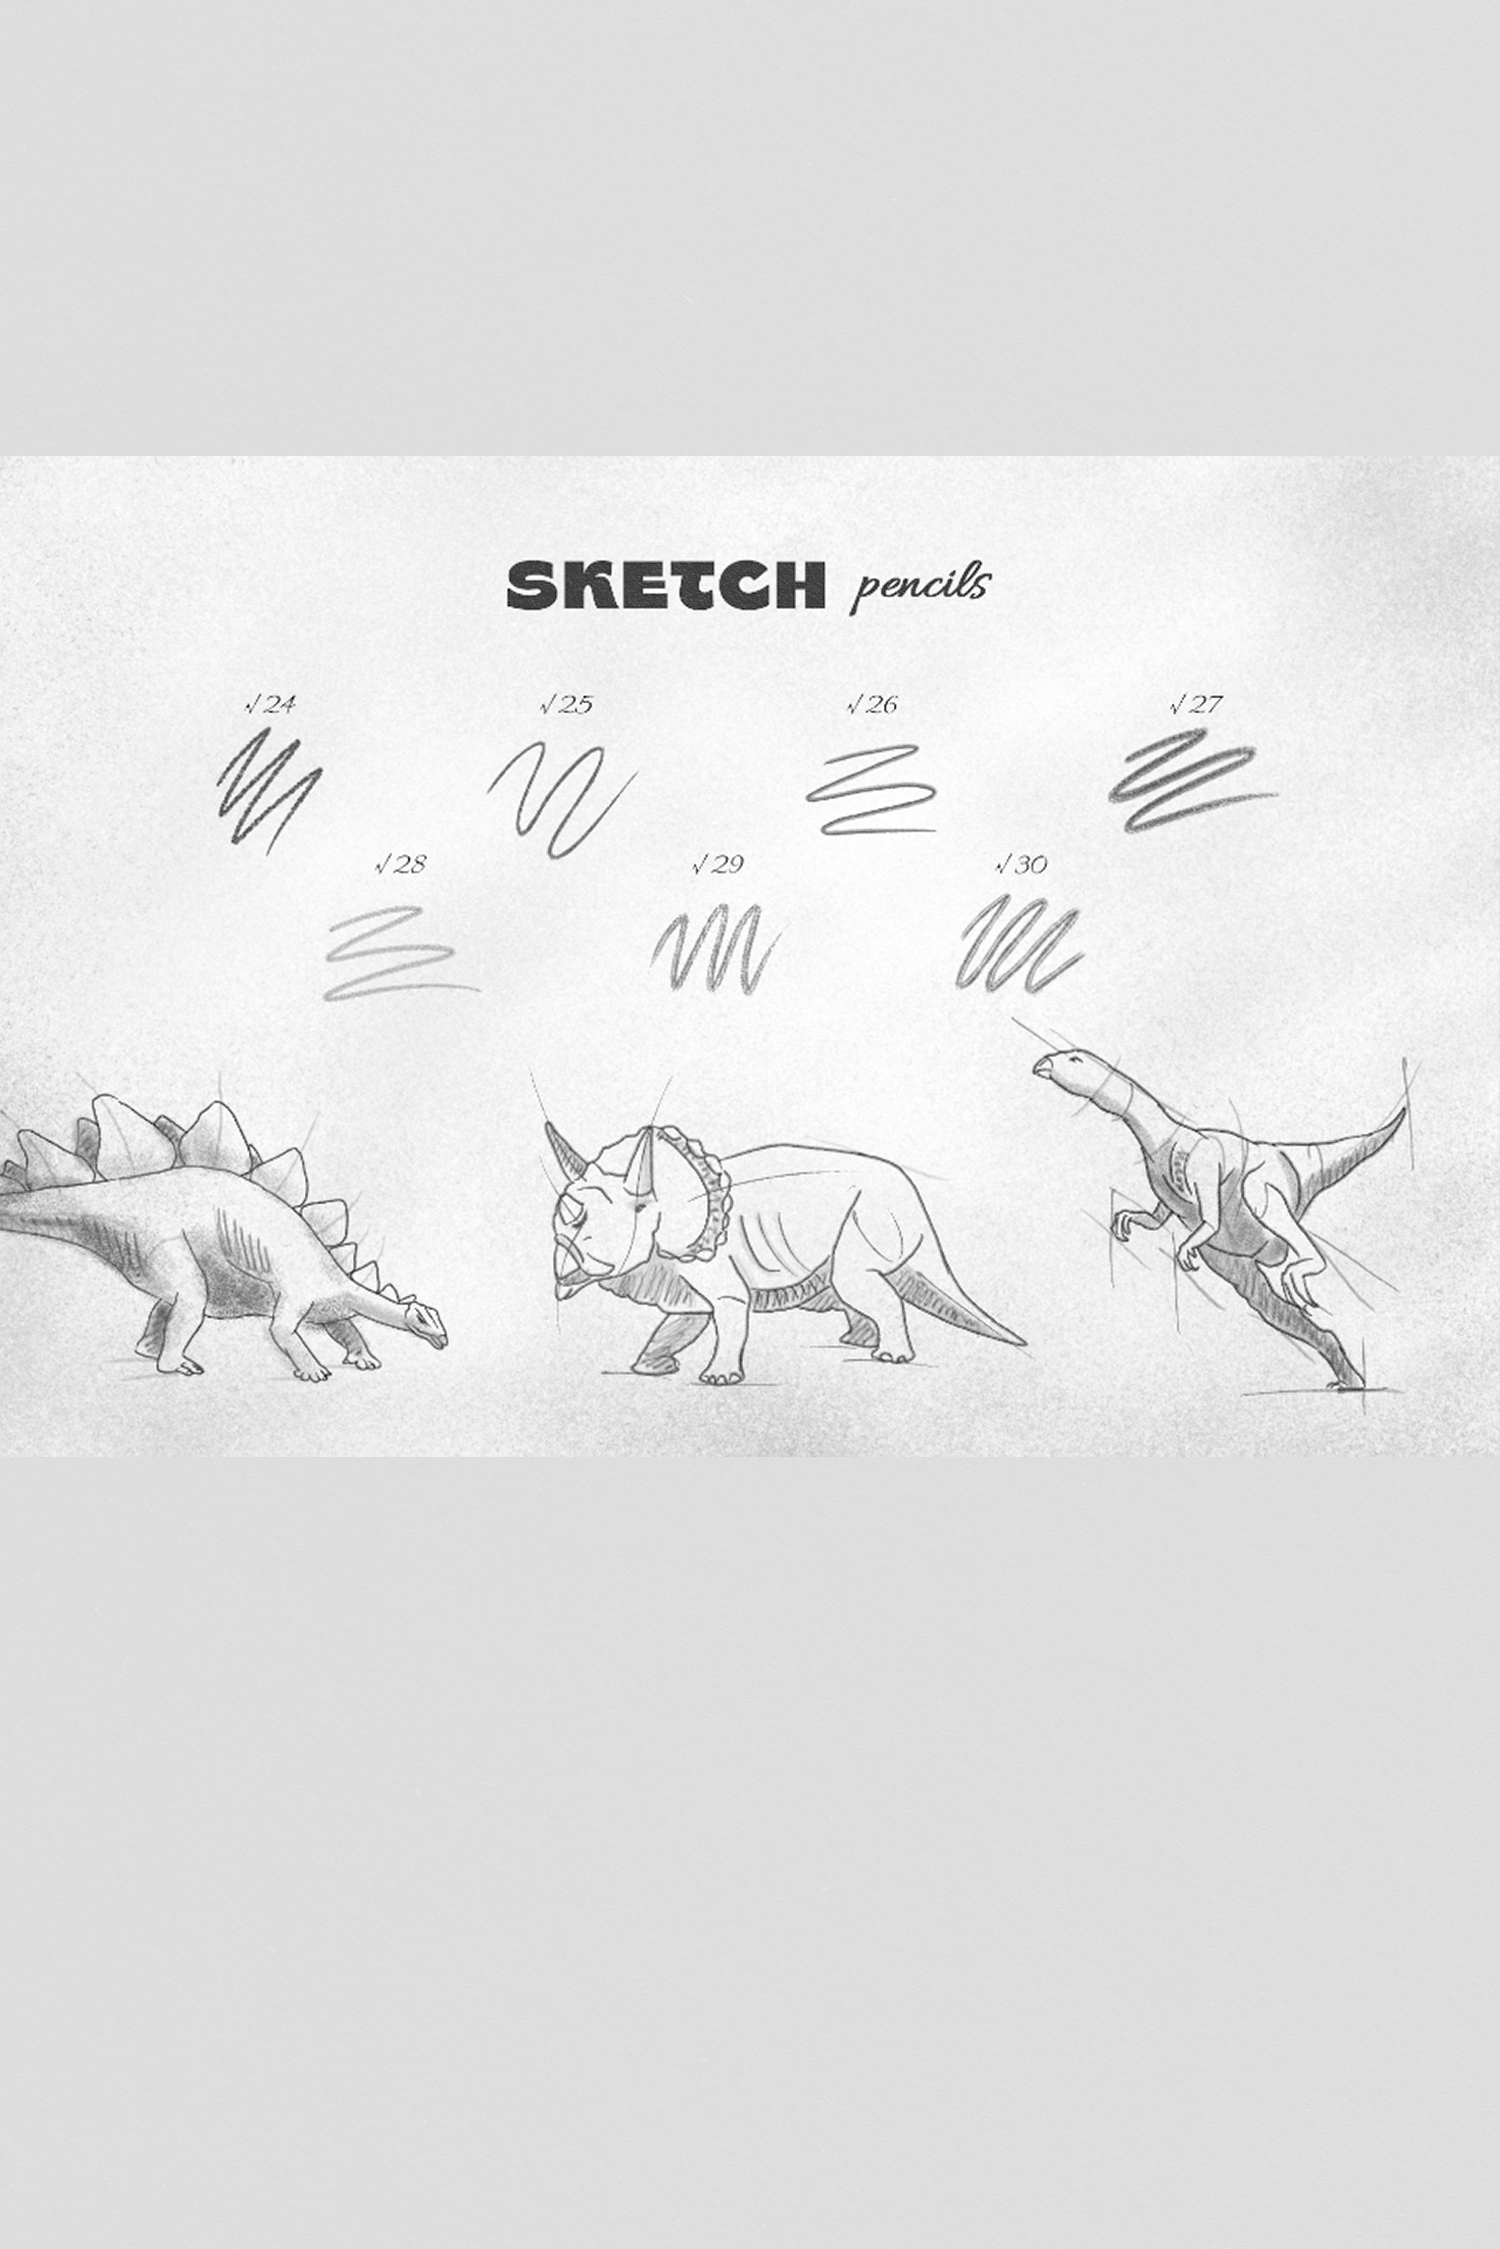 Pencil Brushes by PixelBuddha